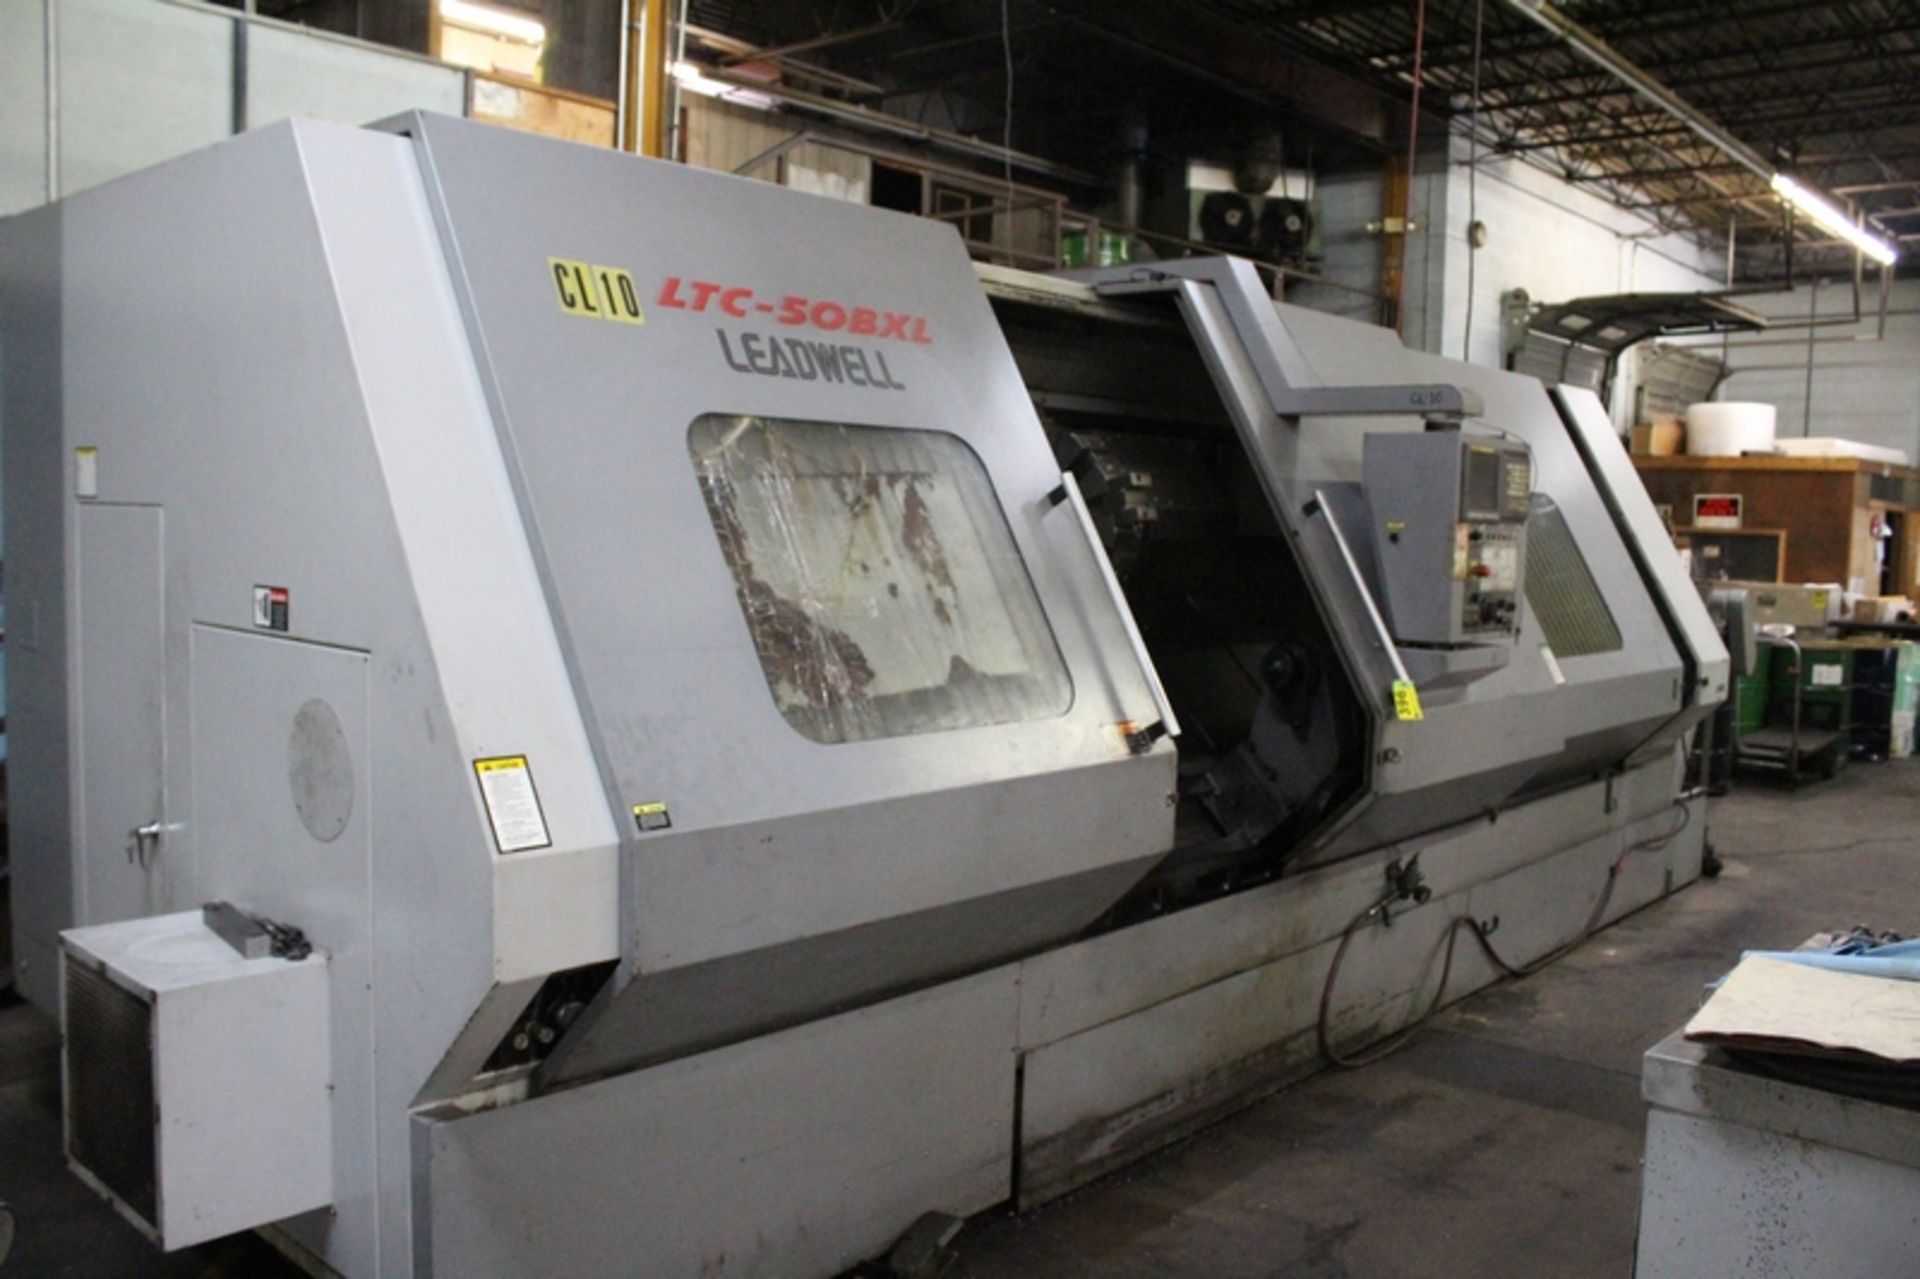 LEADWELL MODEL LTC-50BXL CNC TURNING CENTER, S/N LT2JF0783 (NEW 2006), 35.4 MAX. SWING, APPROX. 31.